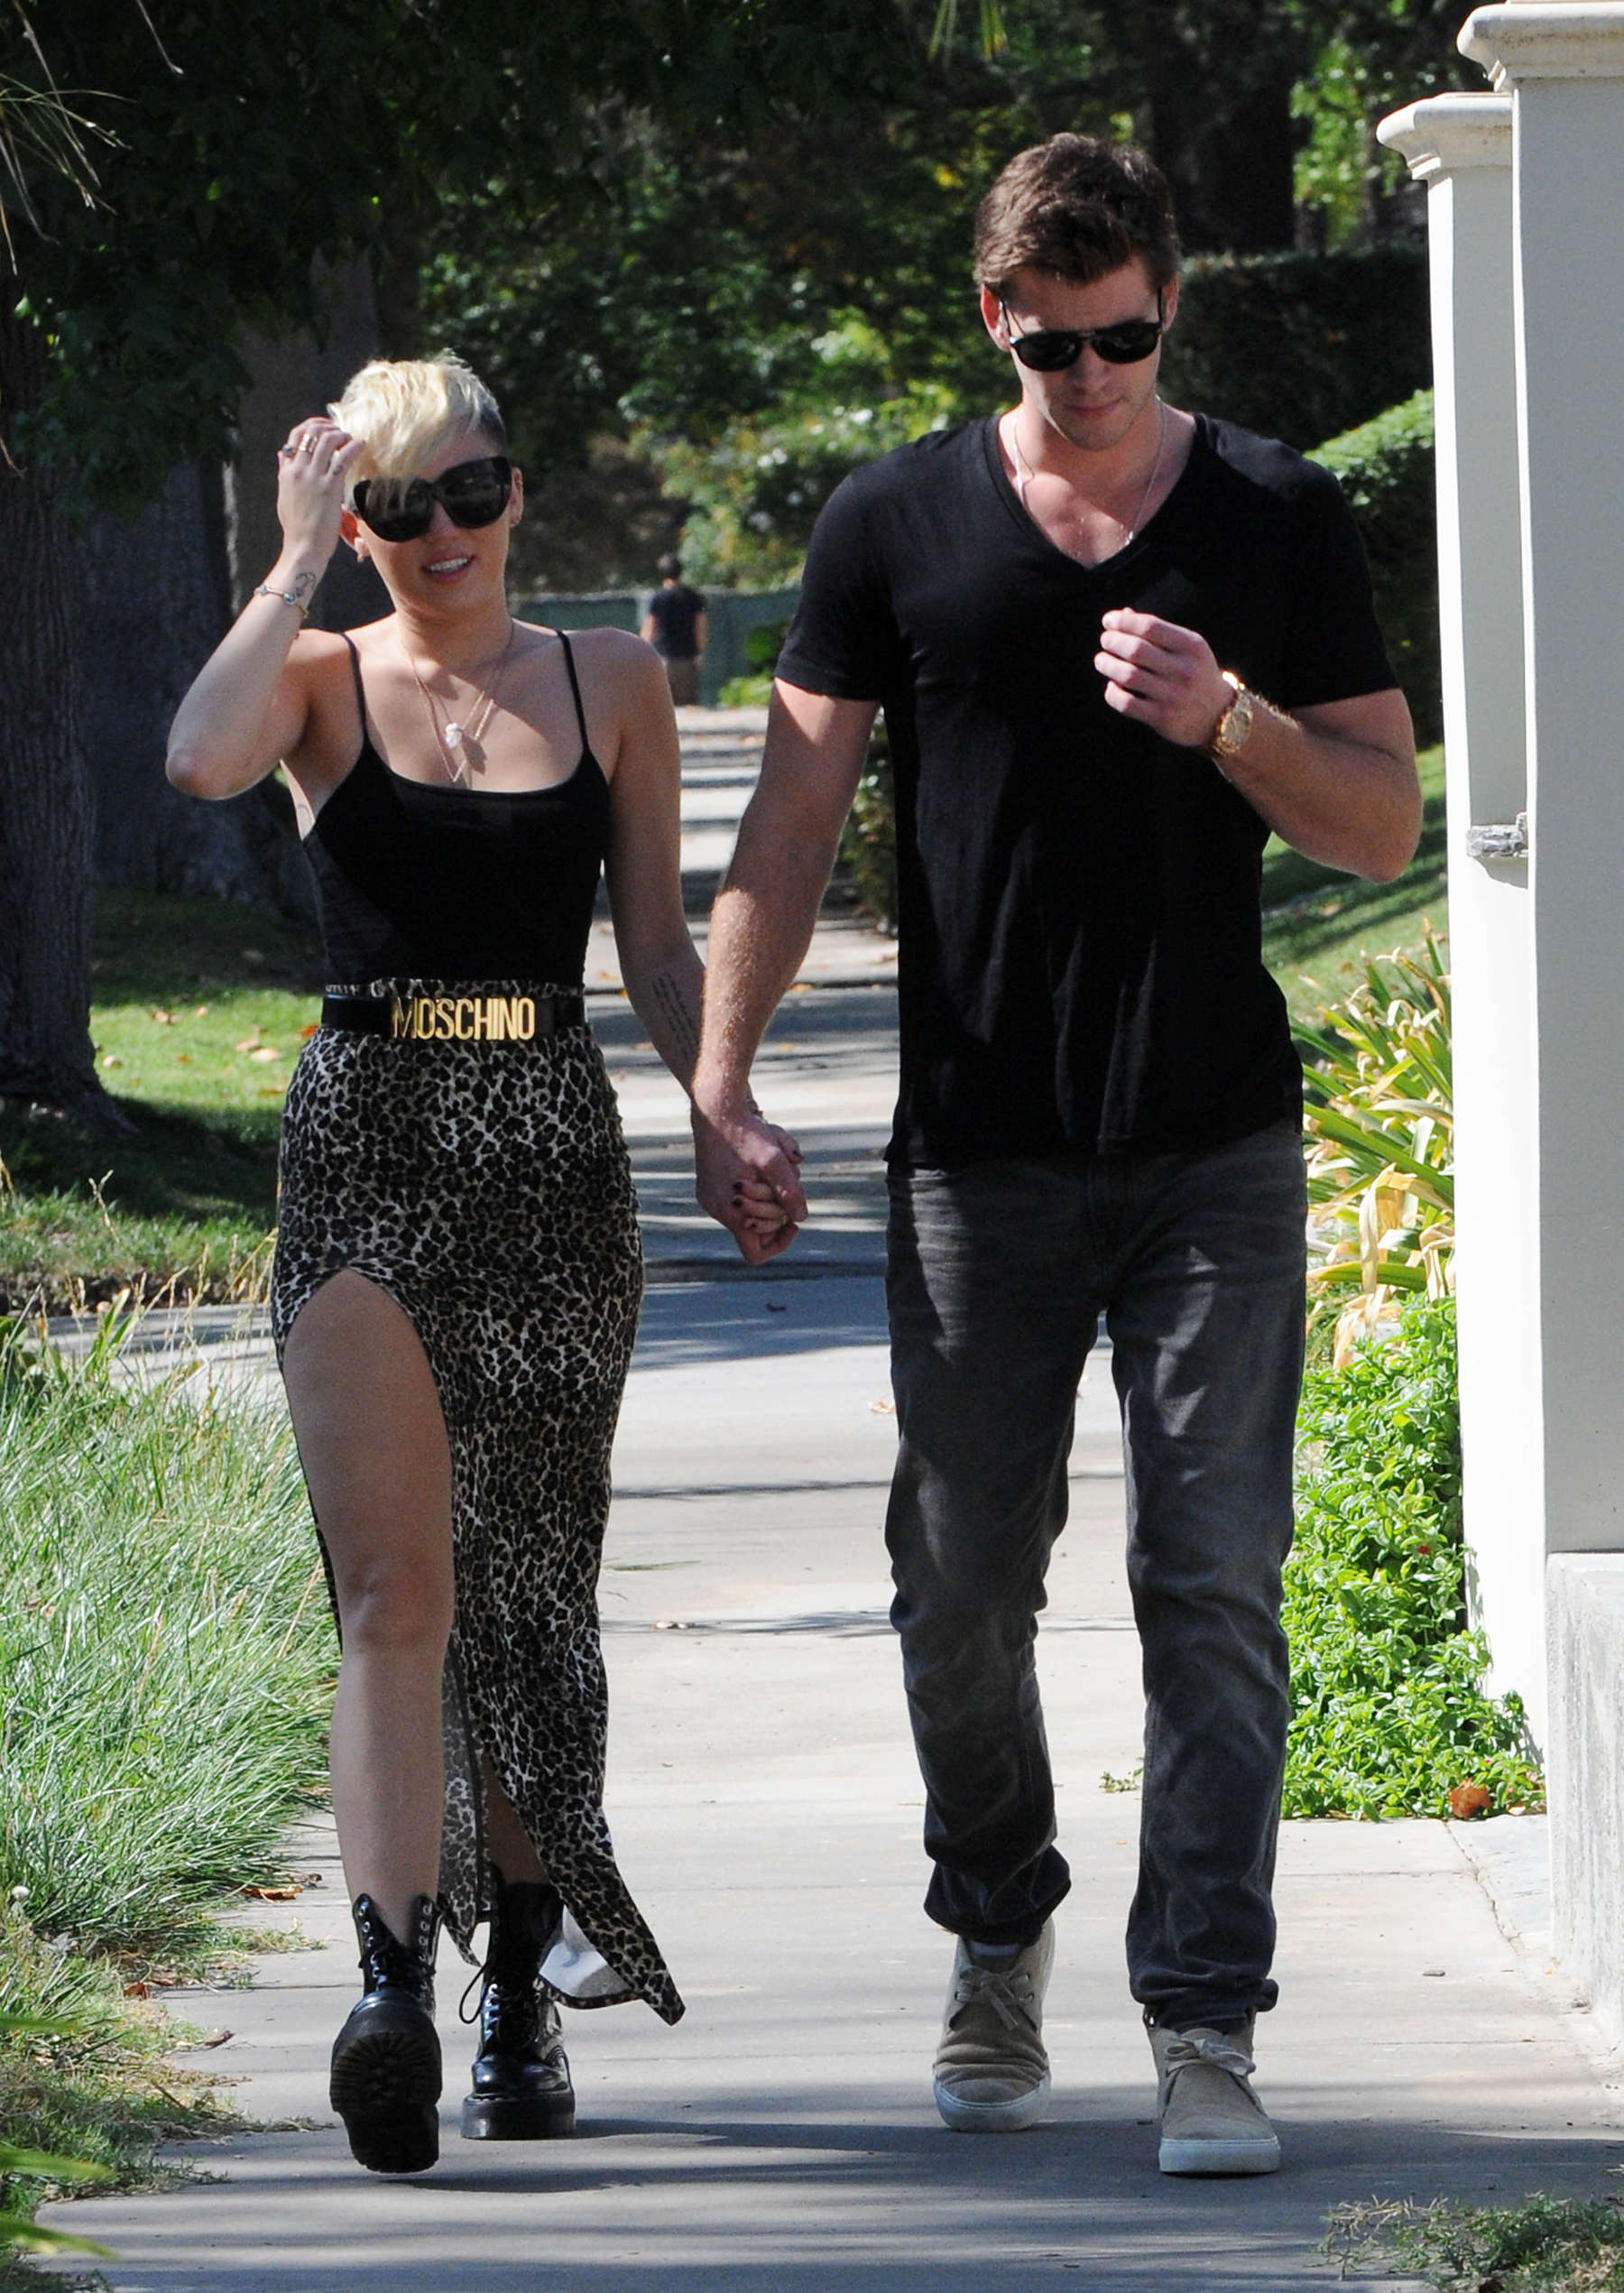 Miley Cyrus showing her legs out in Studio City